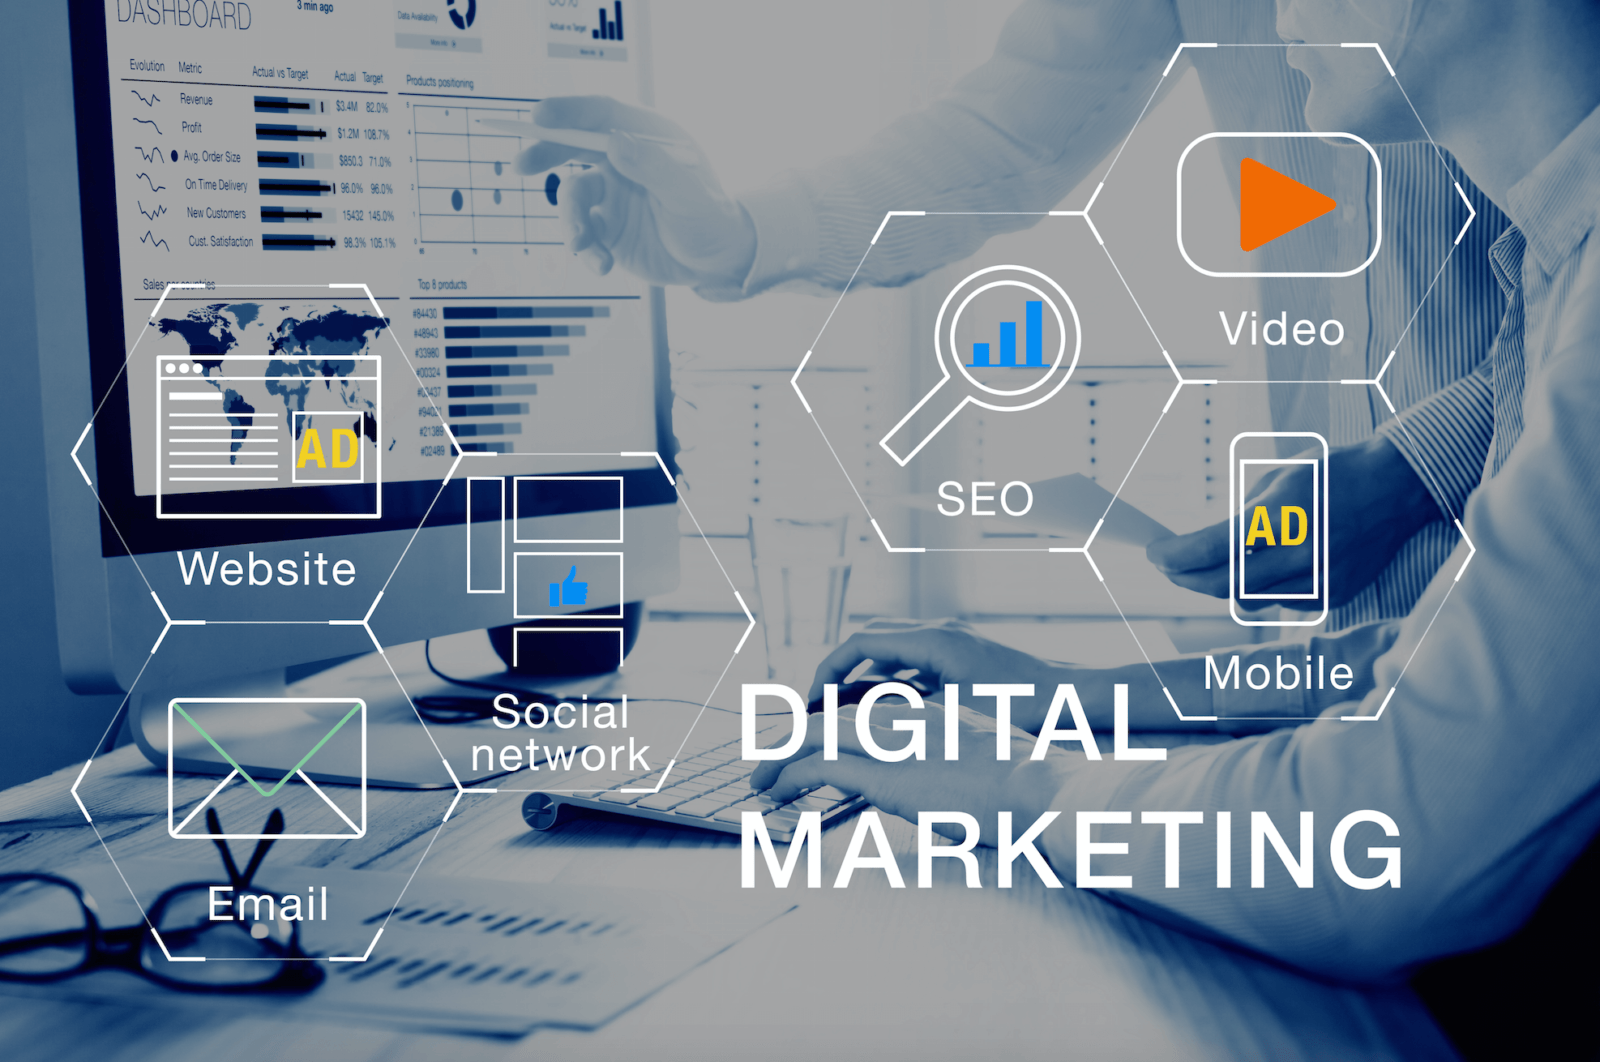 What-is-Digital-Marketing-and-What-are-Its-Benefits-800x531@2x